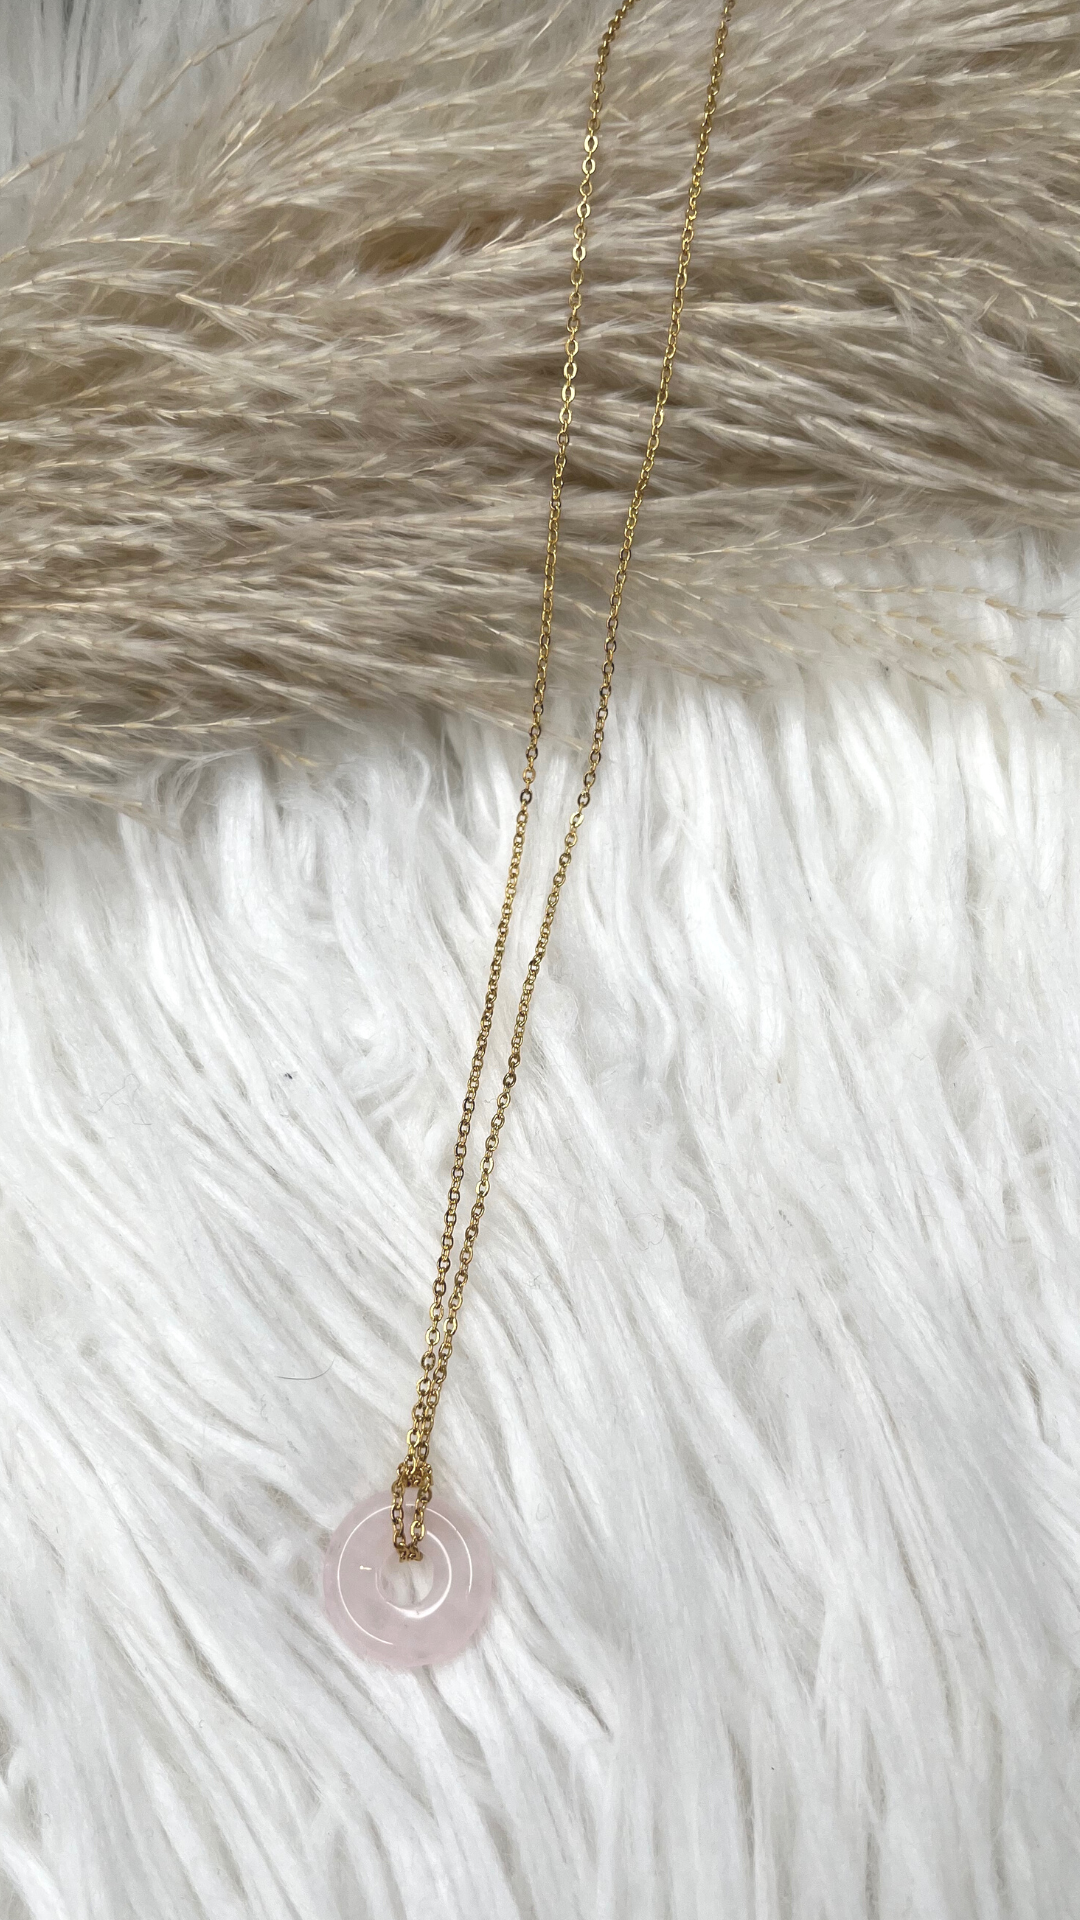 The Torus Necklace - Natural Rose Quartz crystal with 18k gold-plated, Stainless-steel chain